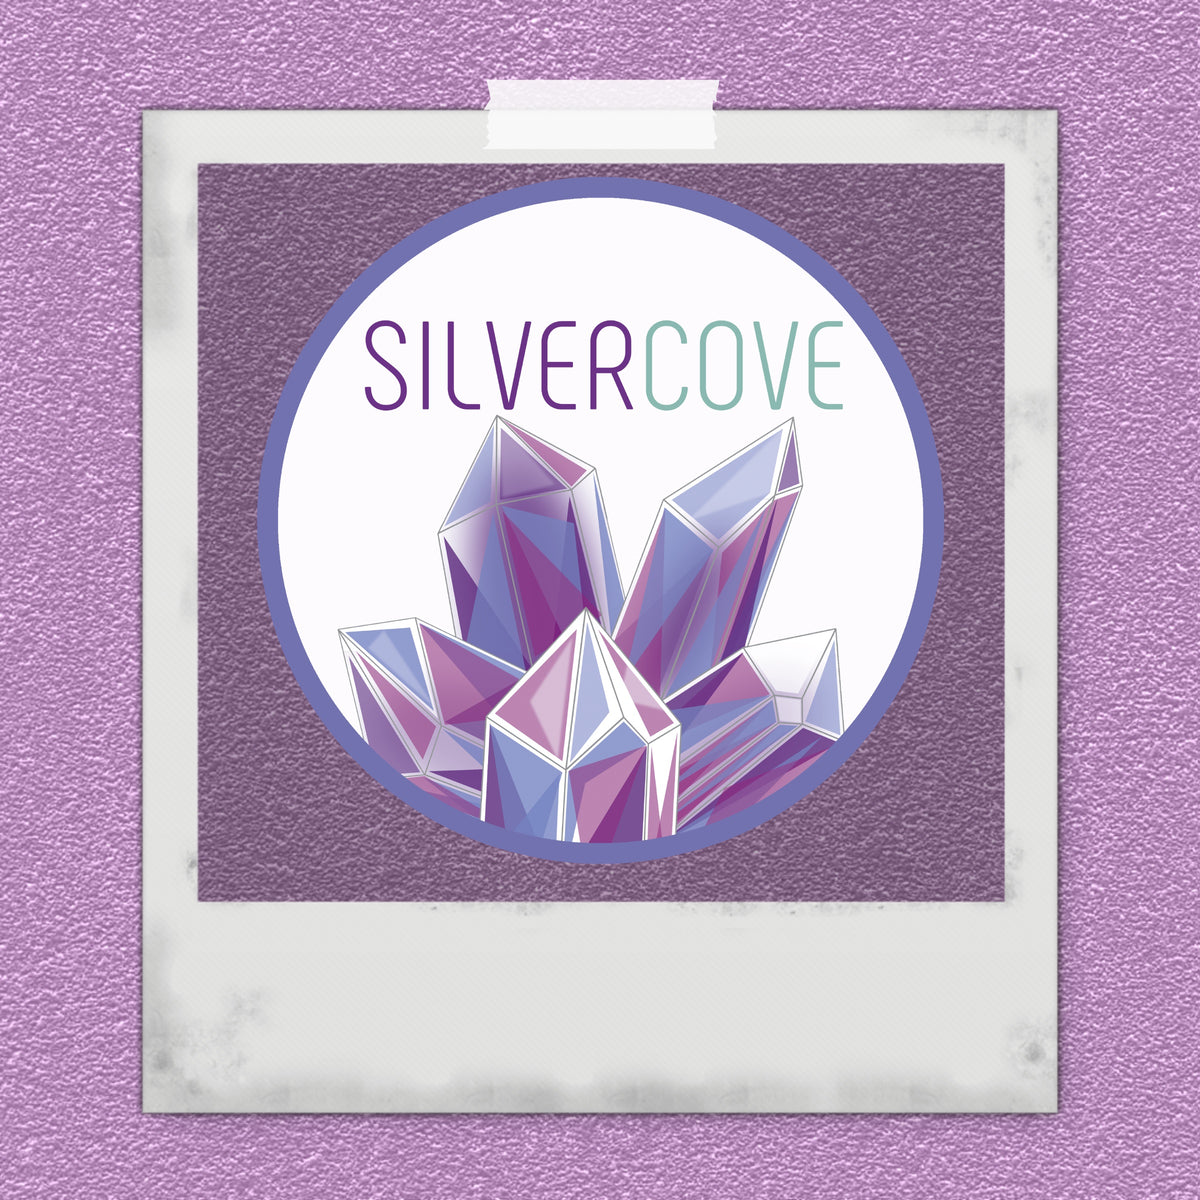 All Silver Cove Products – Silver Cove Ltd Online